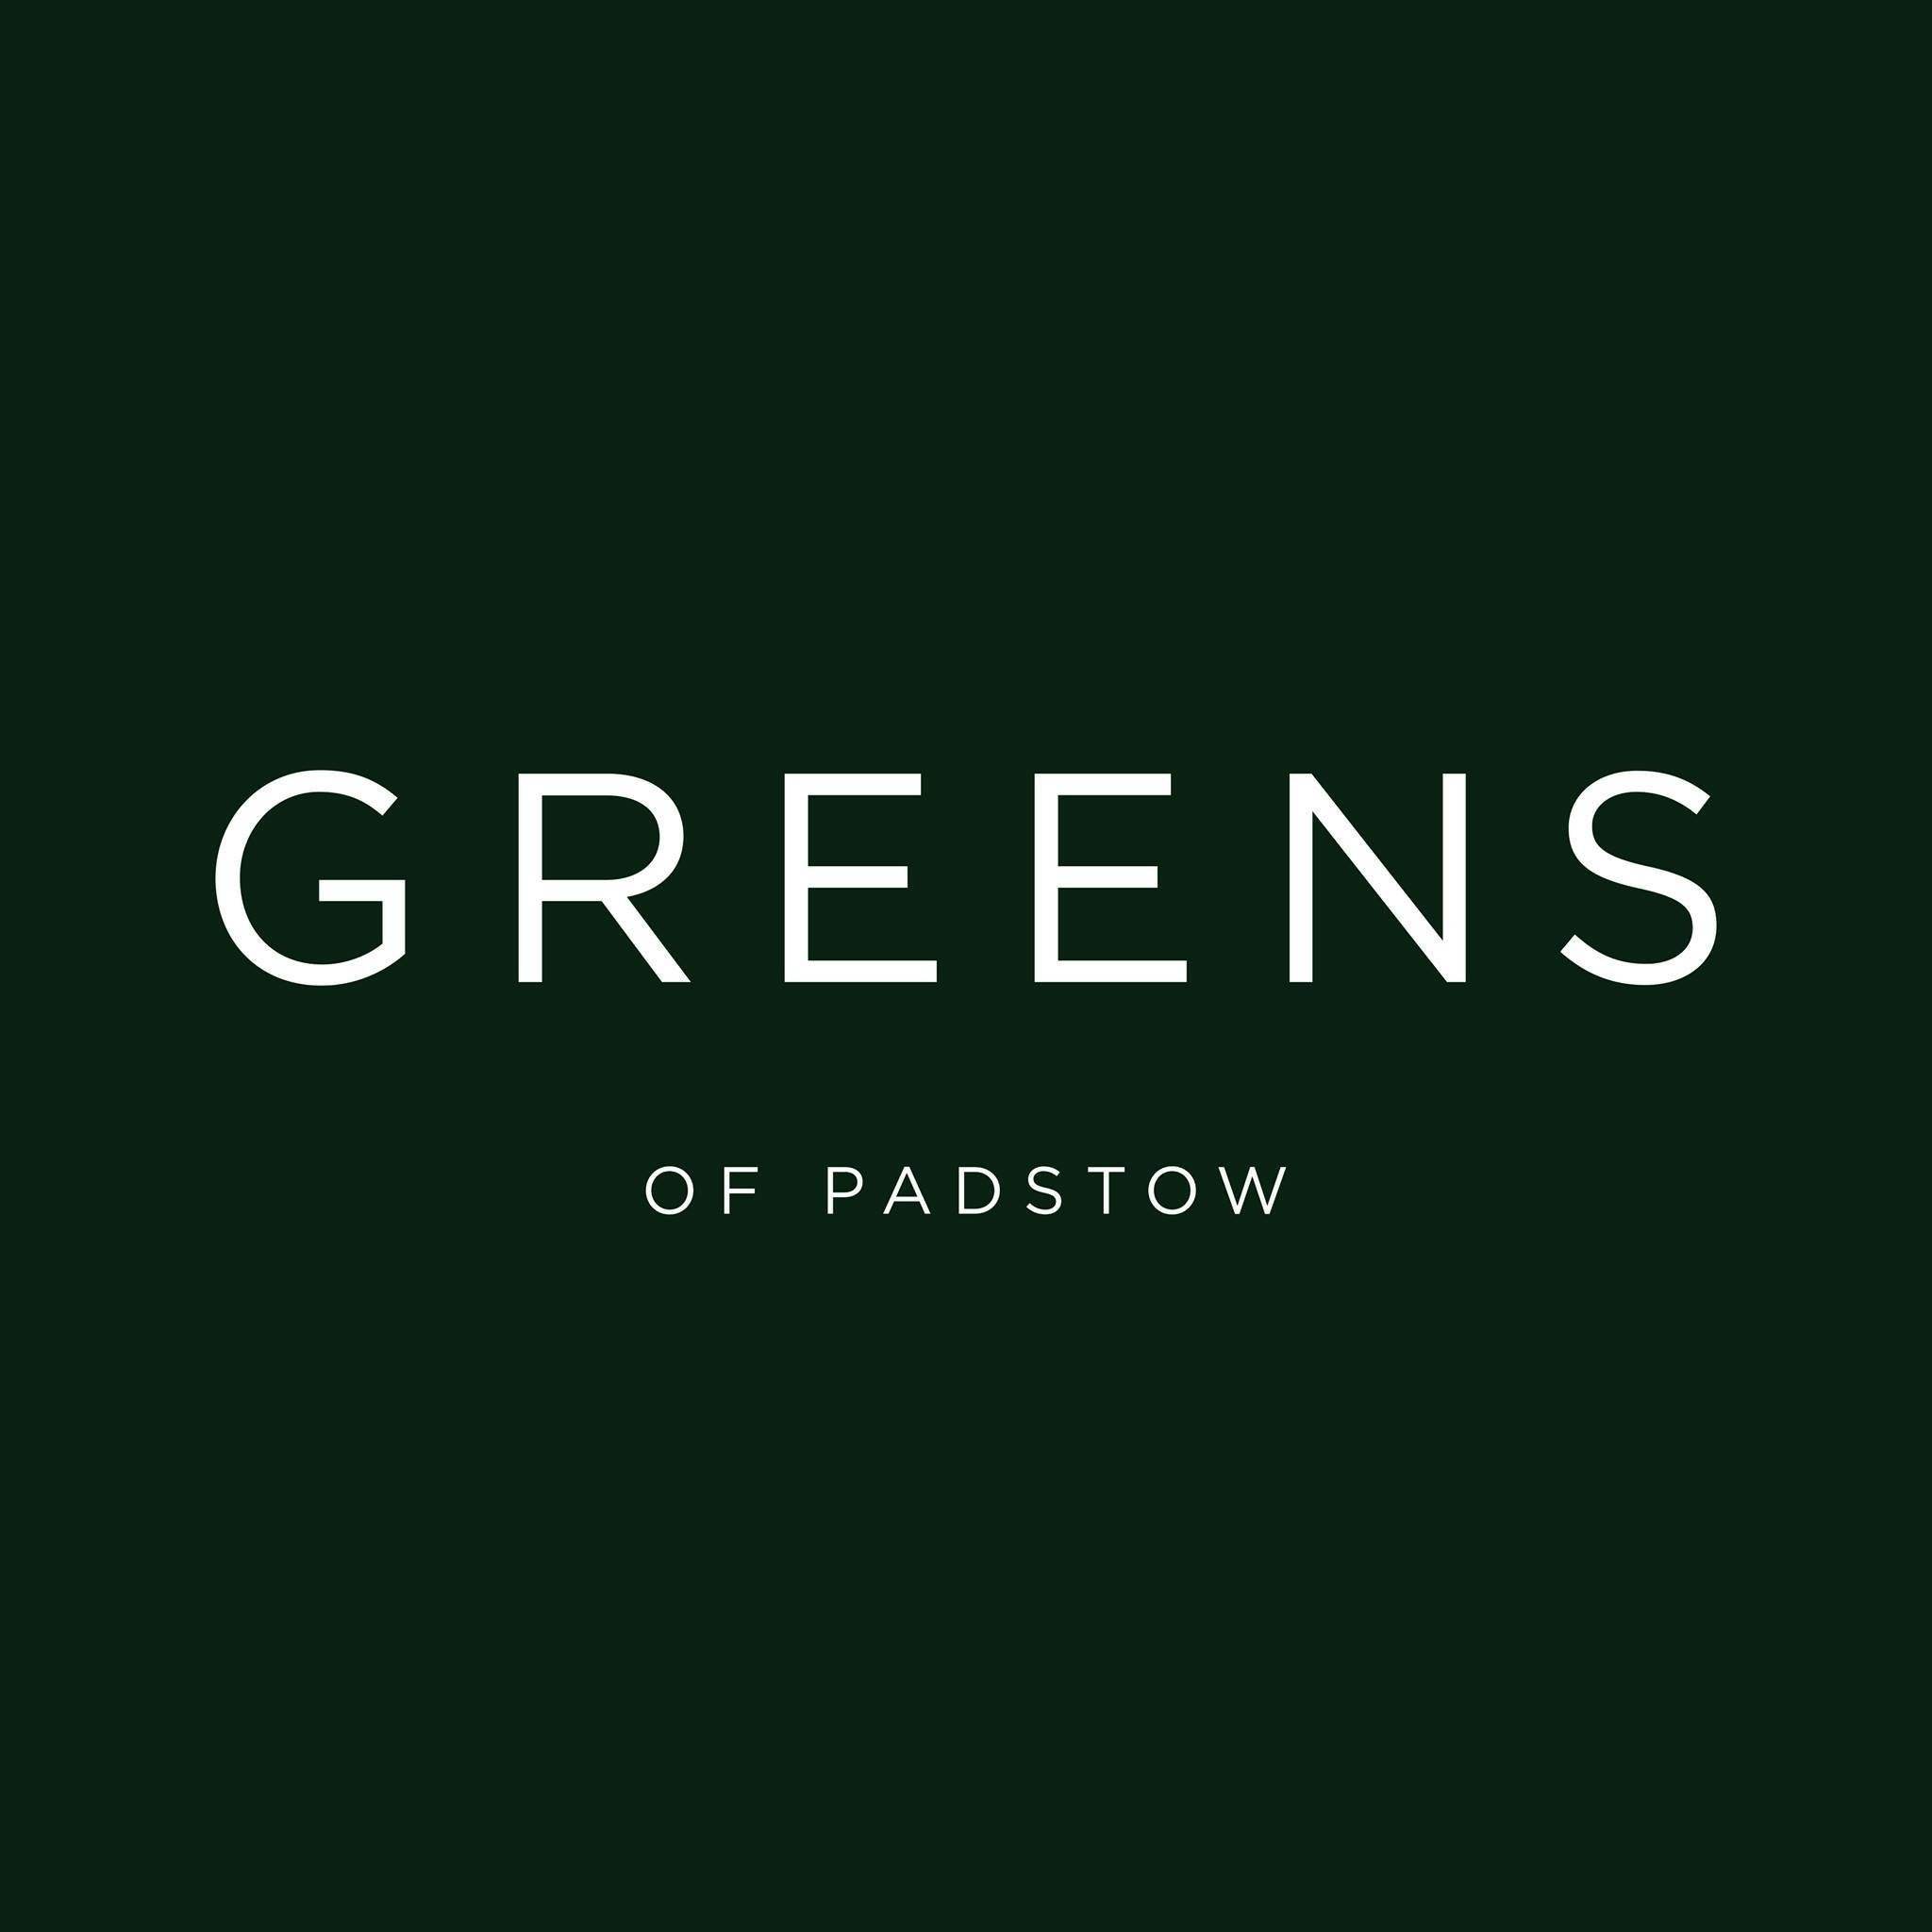 Greens of Padstow